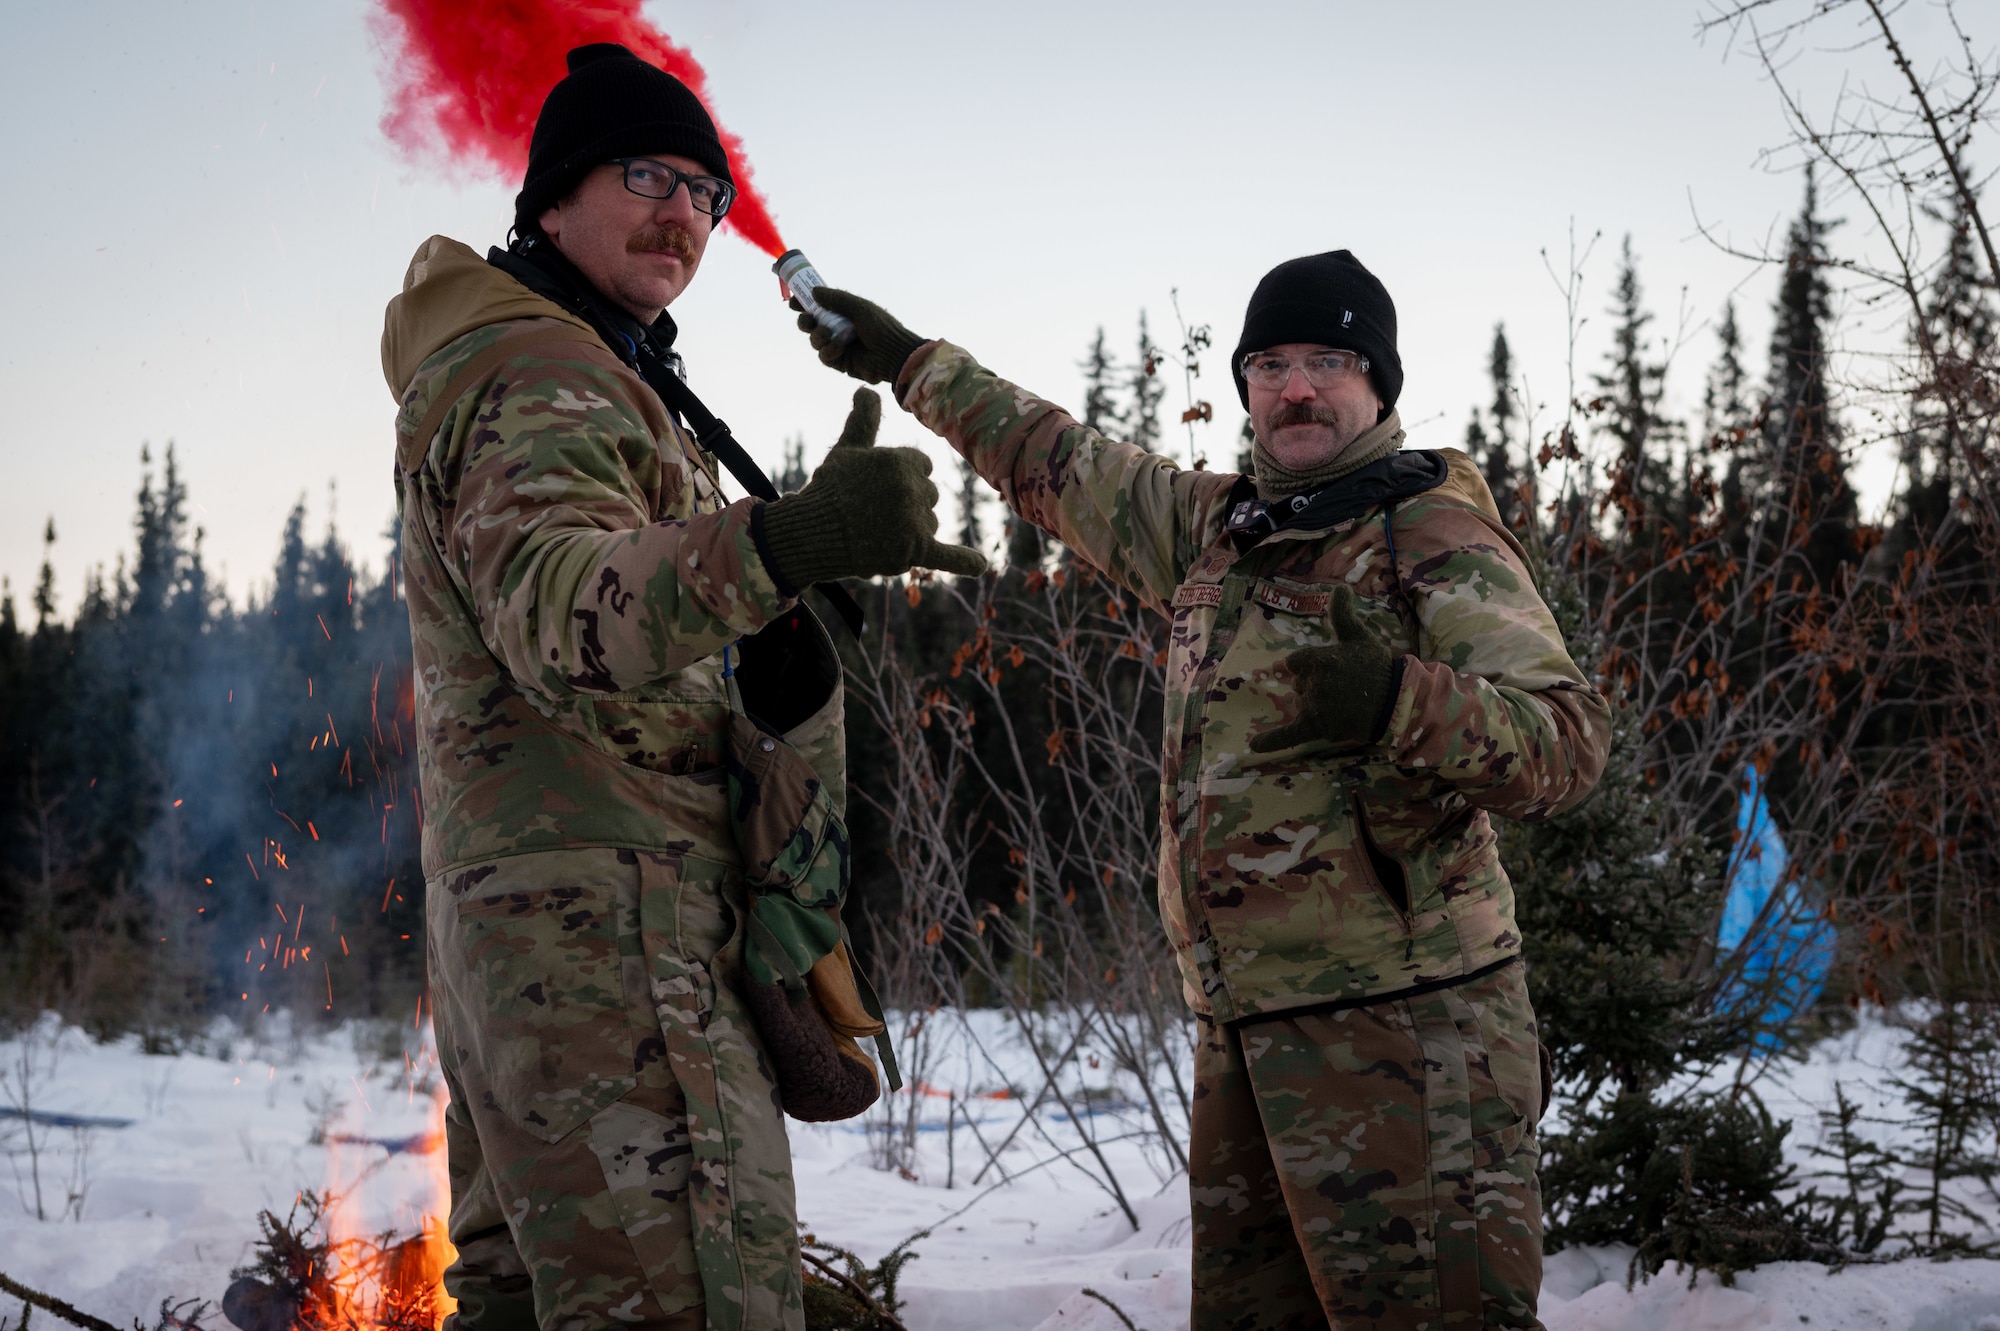 U.S. Air Force Master Sgt. James Cain (left) and Master Sgt. Justin Streitberger give the shaka gesture as they use MK-124 signaling flares at their ground-to-air signal (GTAS) area in the Arctic field training area on Eielson Air Force Base, Feb. 16, 2024.